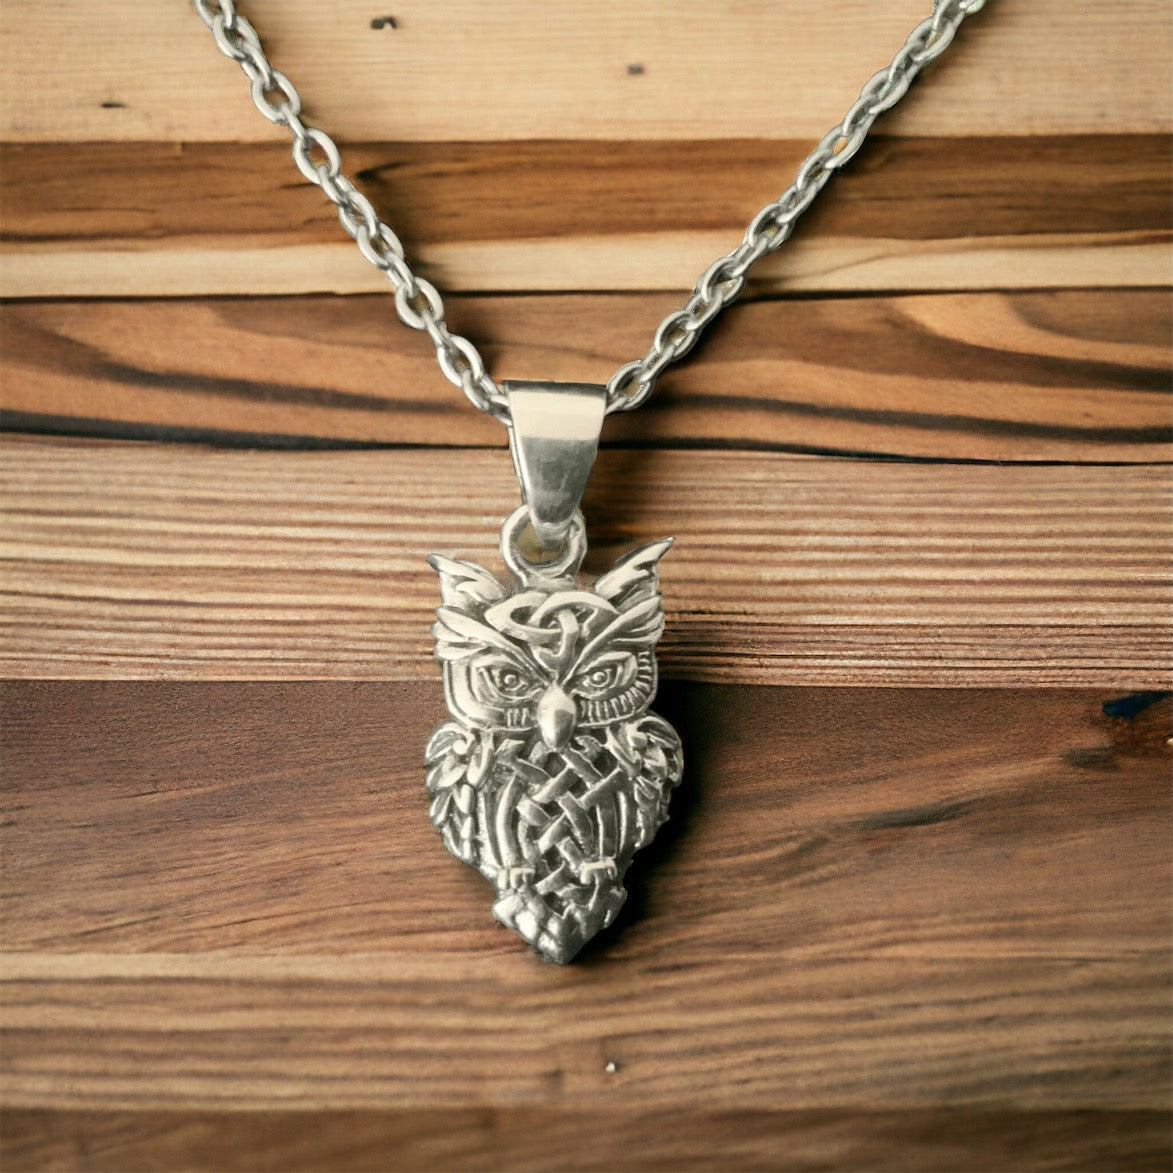 Handcast 925 Sterling Silver Celtic Owl Pendant Necklace + Free Chain